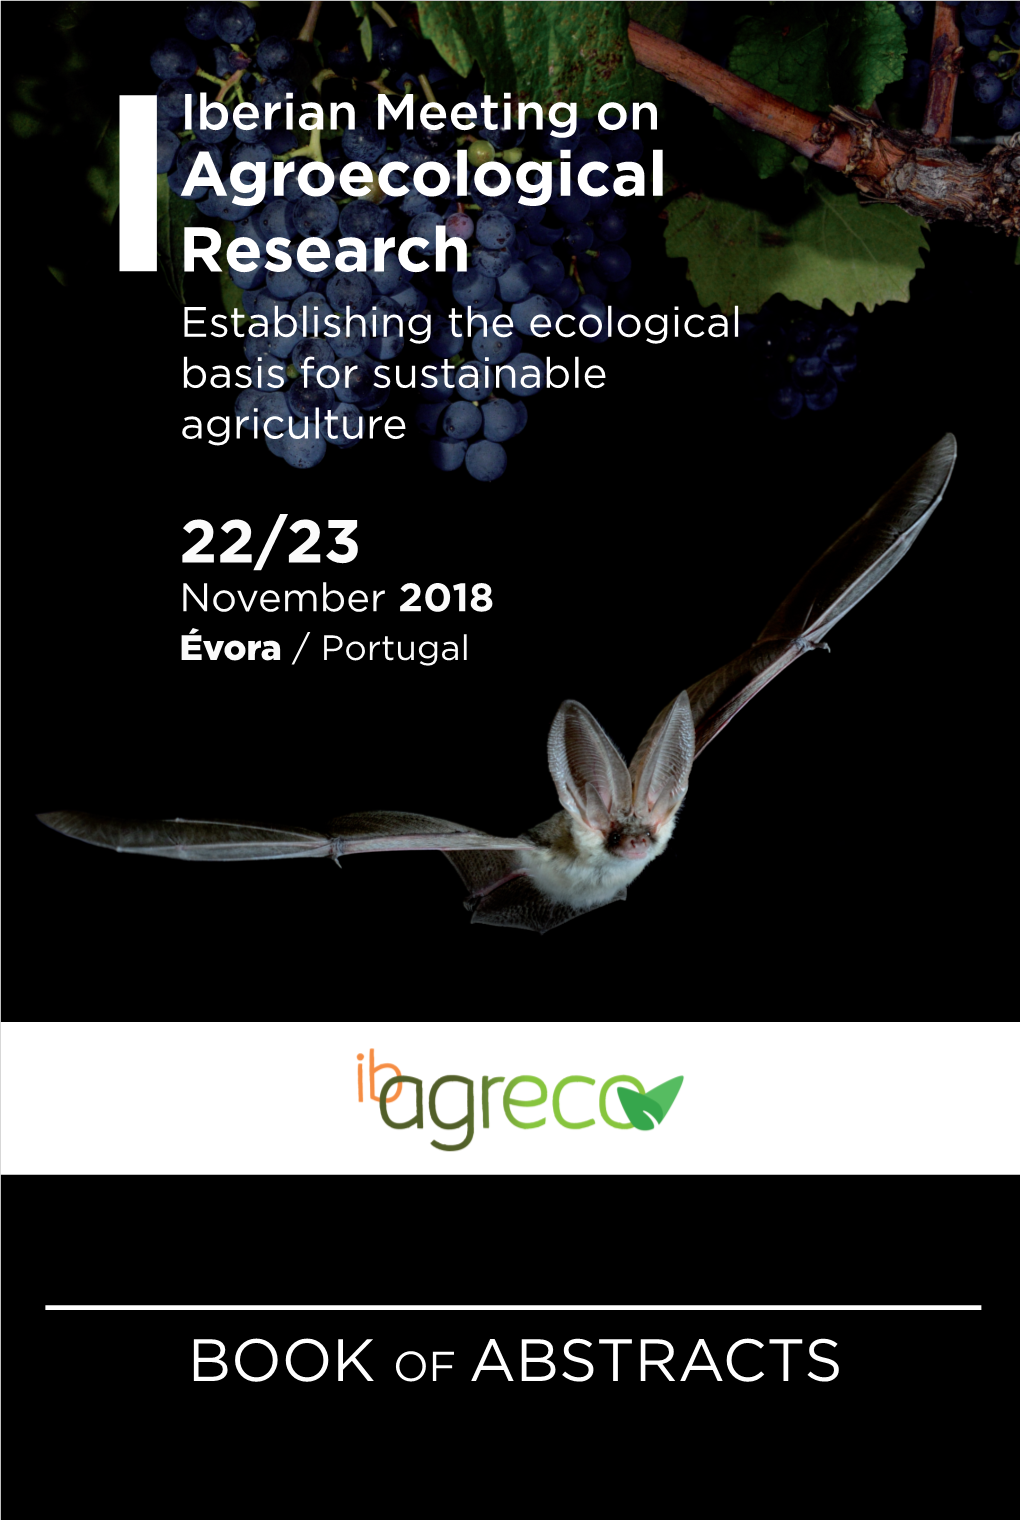 BOOK of ABSTRACTS 1St Iberian Meeting on Agroecological Research, Évora, November 2018